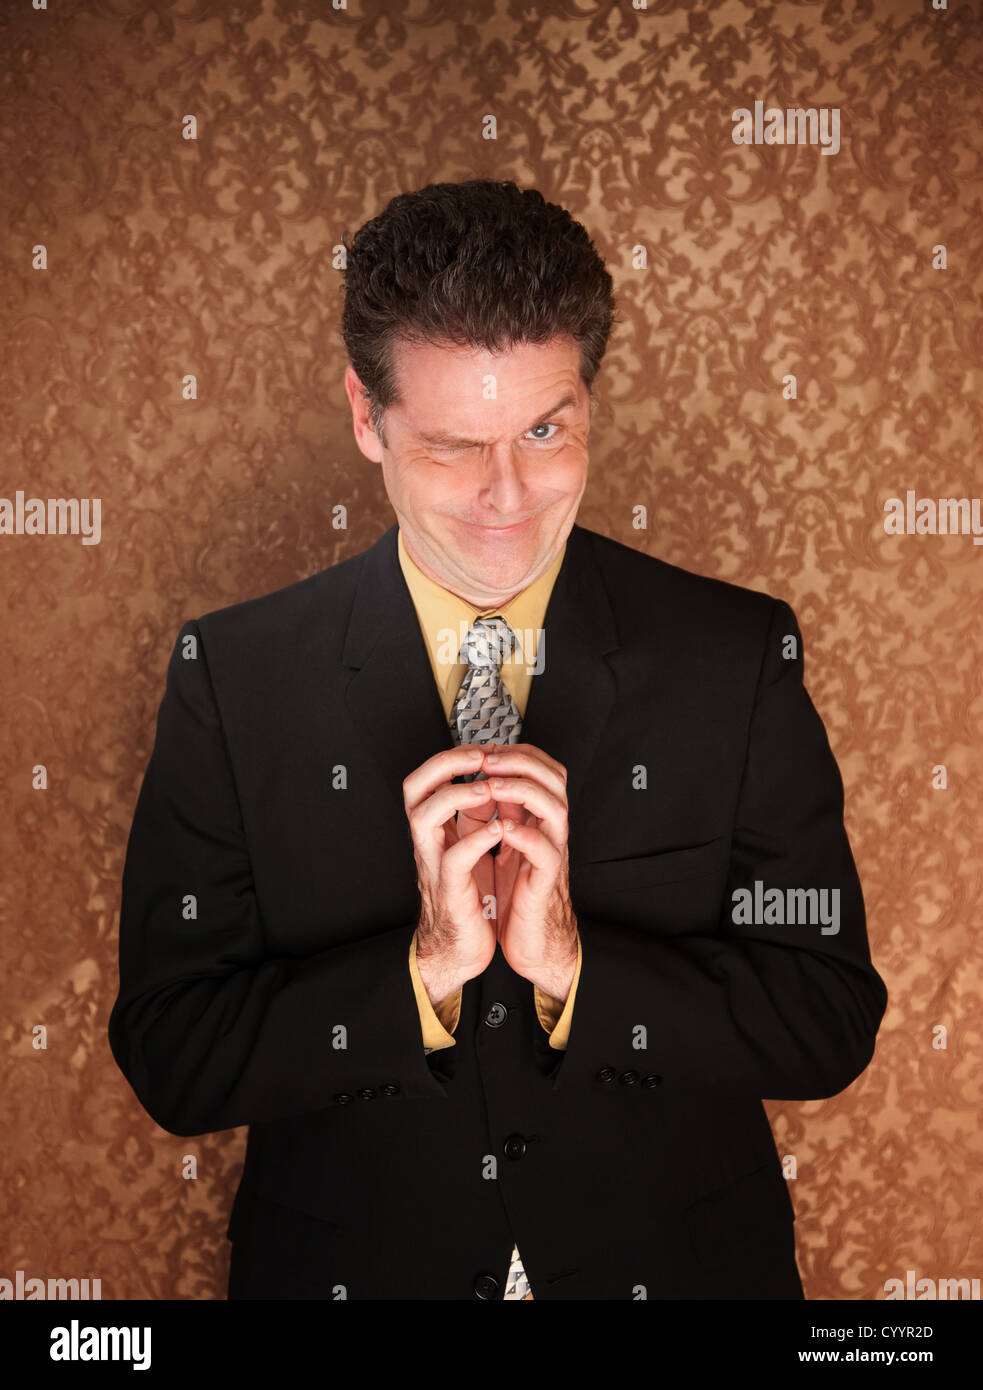 A tricky businessman winking and thinking of a plan Stock Photo